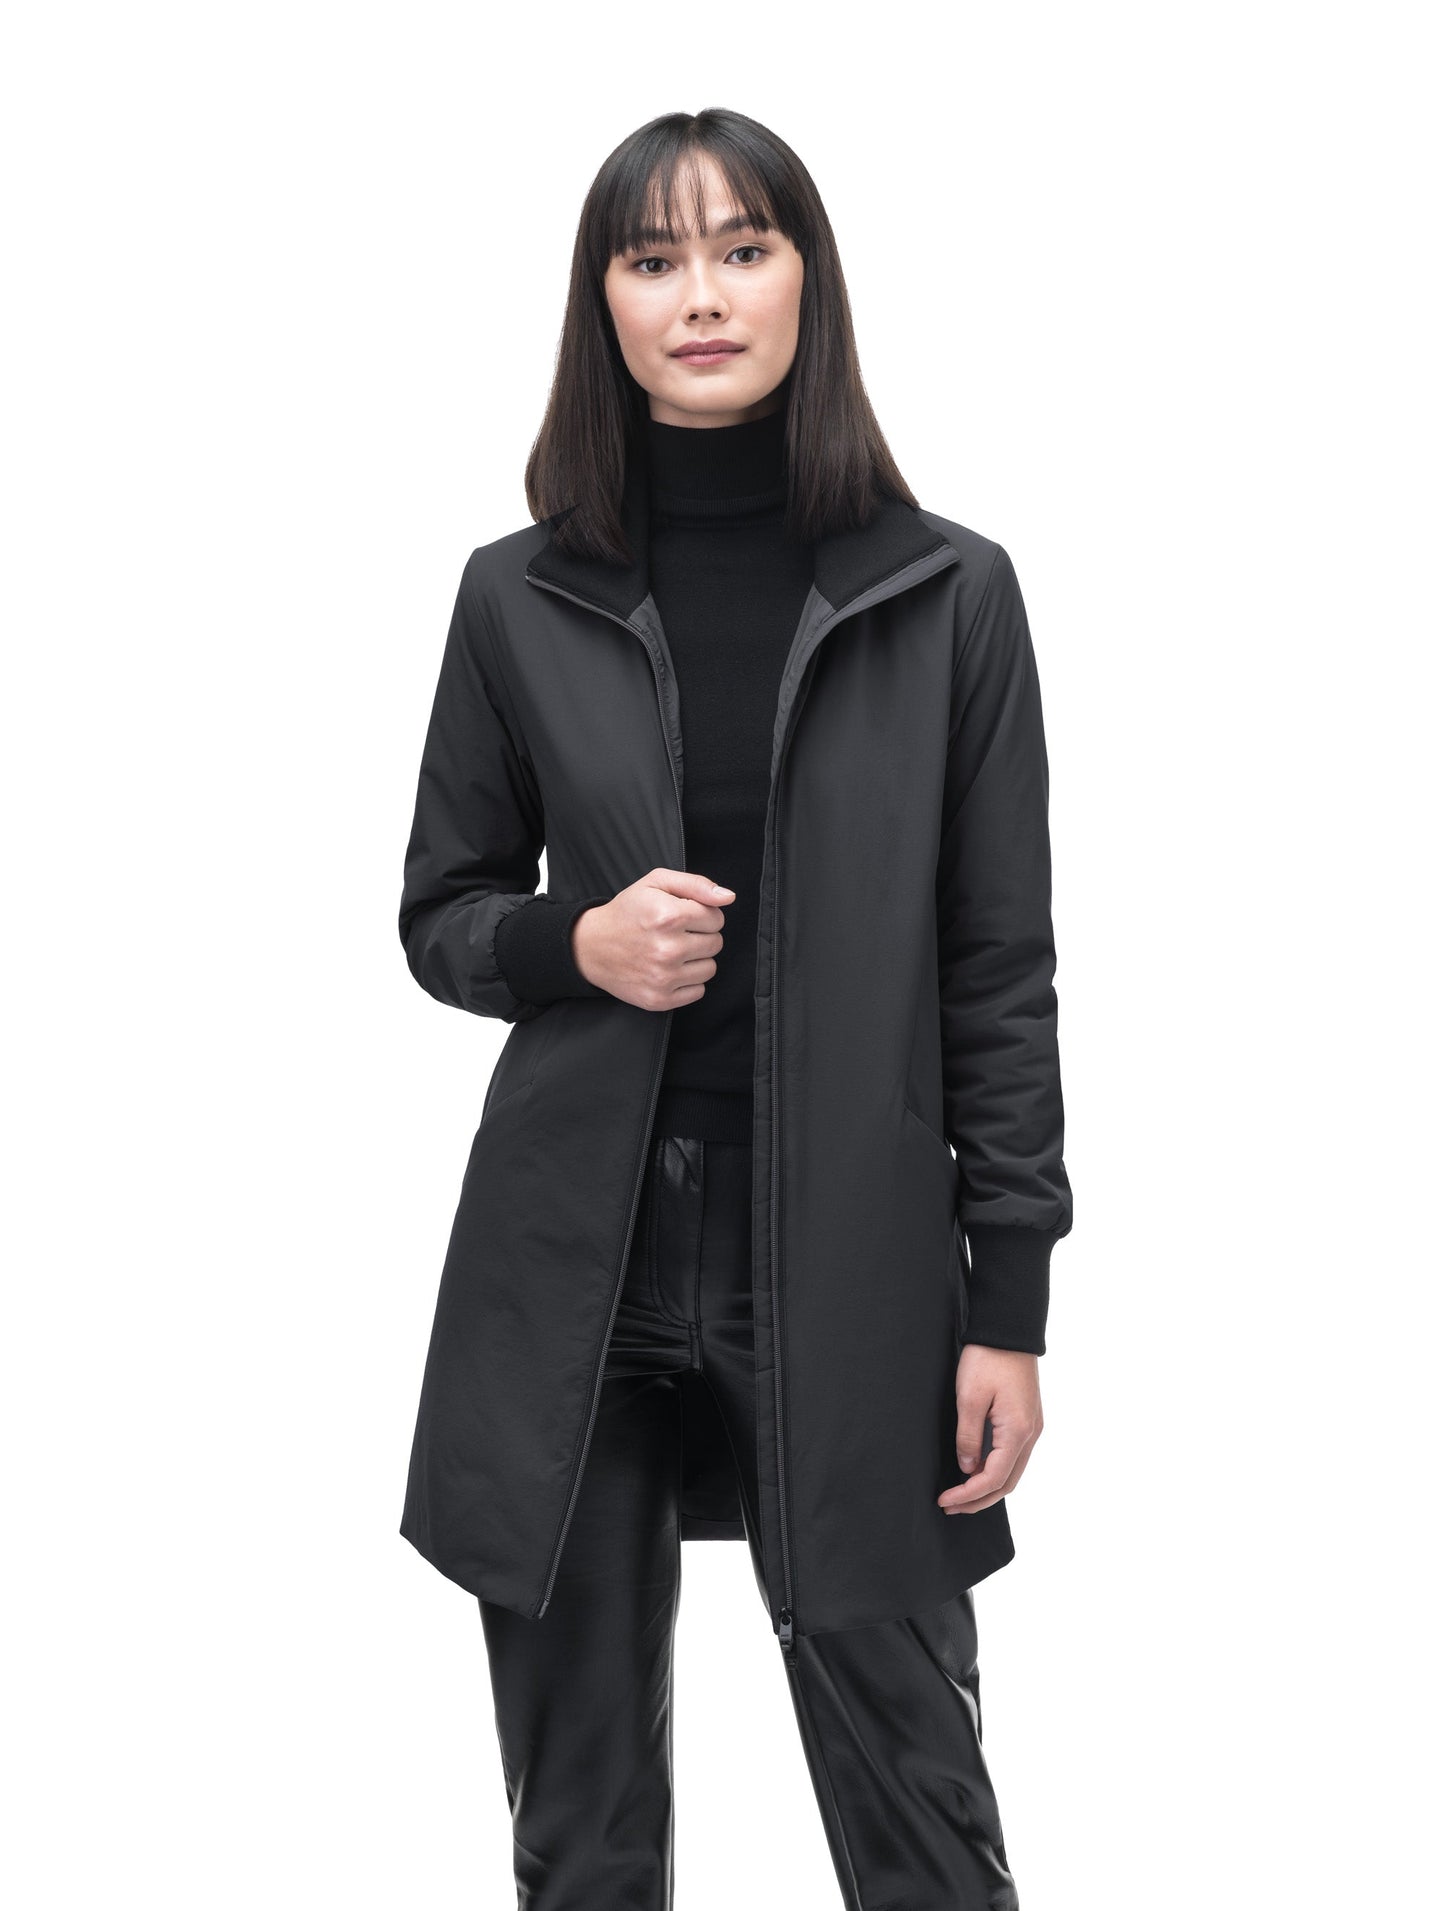 Mora Ladies Mid Layer Rib Neck Jacket in thigh length, Primaloft insulation, ribbing at collar and cuffs, and two-way front zipper, in Black